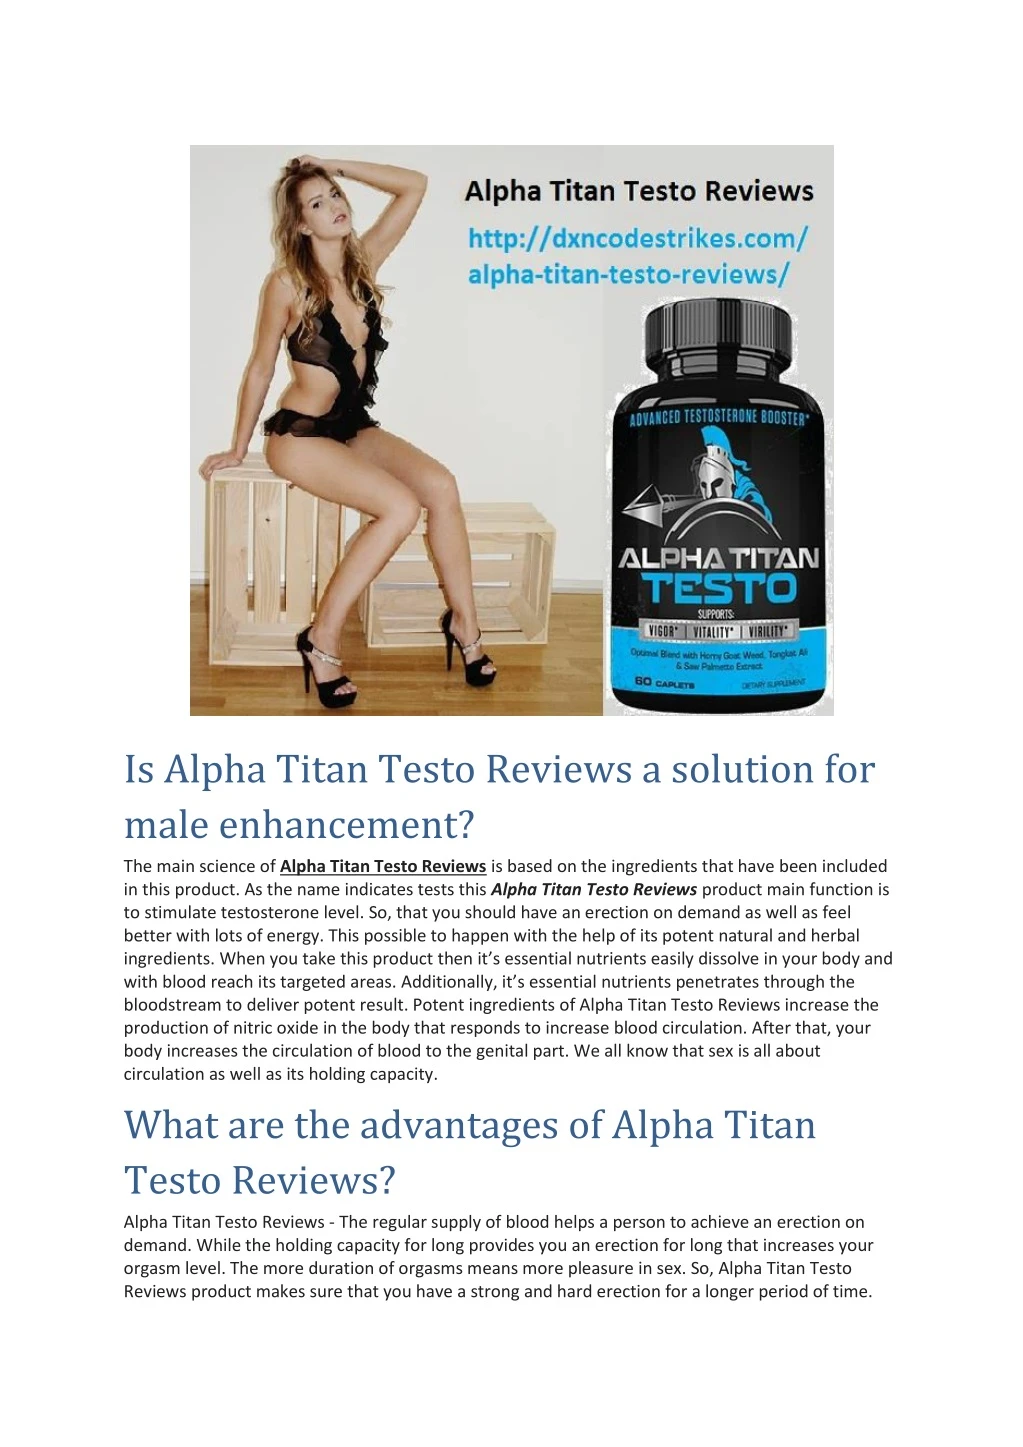 is alpha titan testo reviews a solution for male